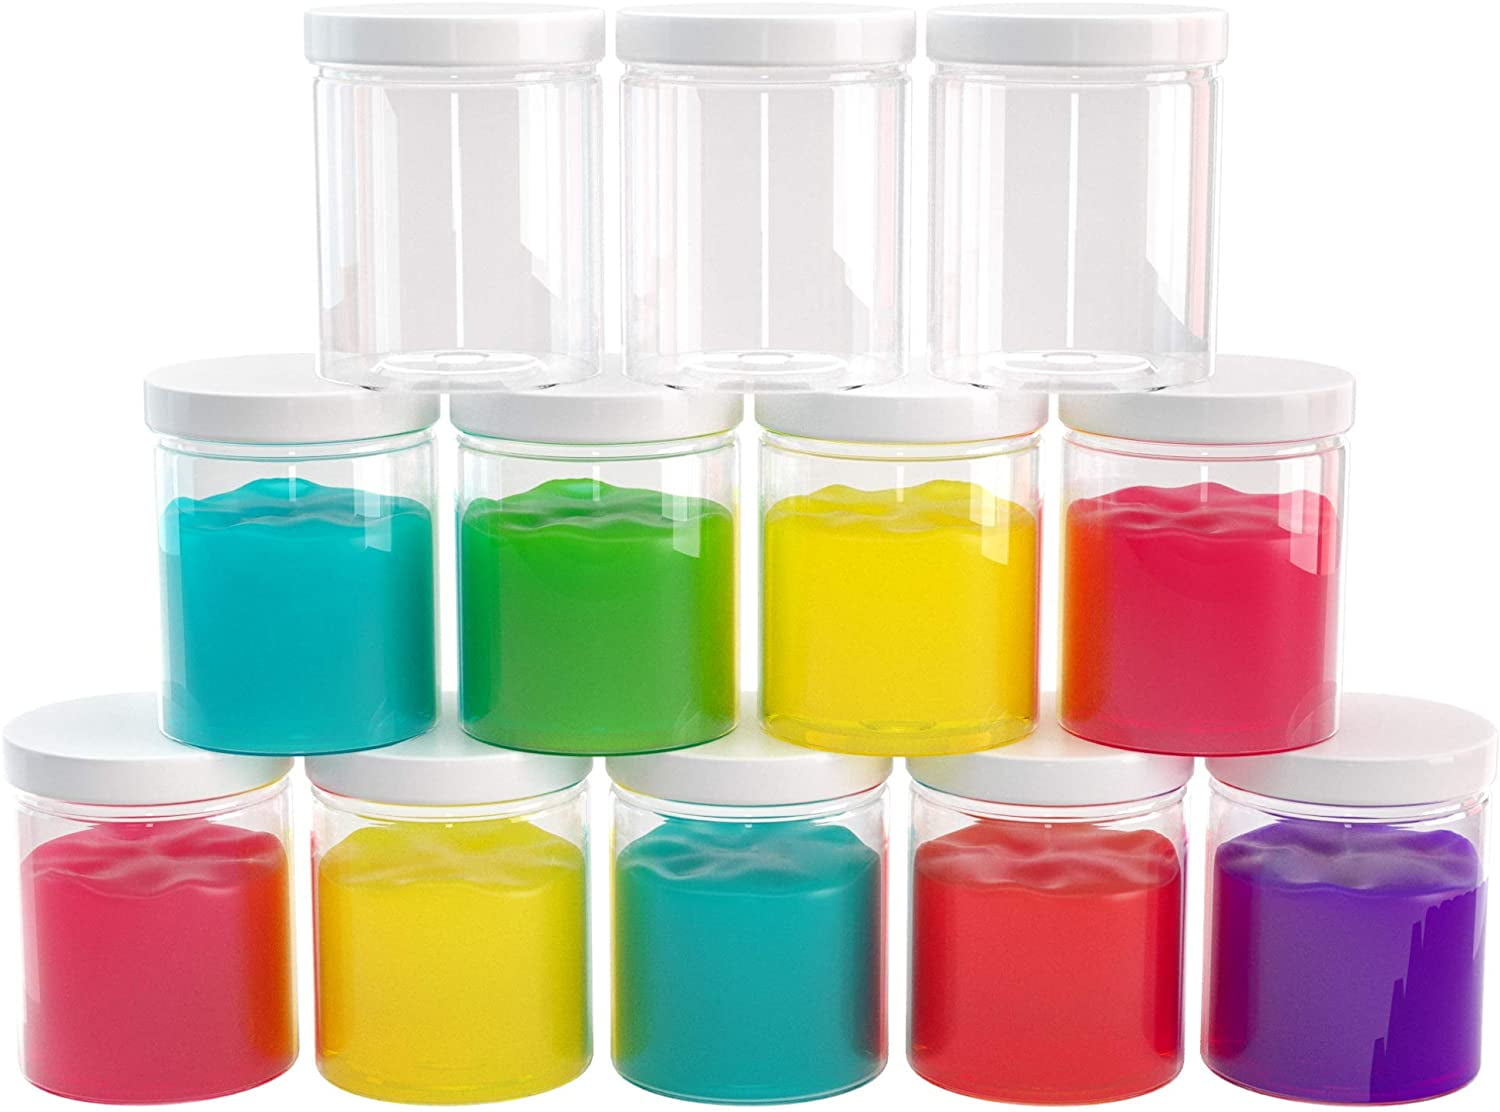 Slime Containers with Water-tight Lids (6 oz, 12 Pack) - Clear Plastic Food  Storage Jars - Great for your slime kit - BPA Free (White) - Walmart.com